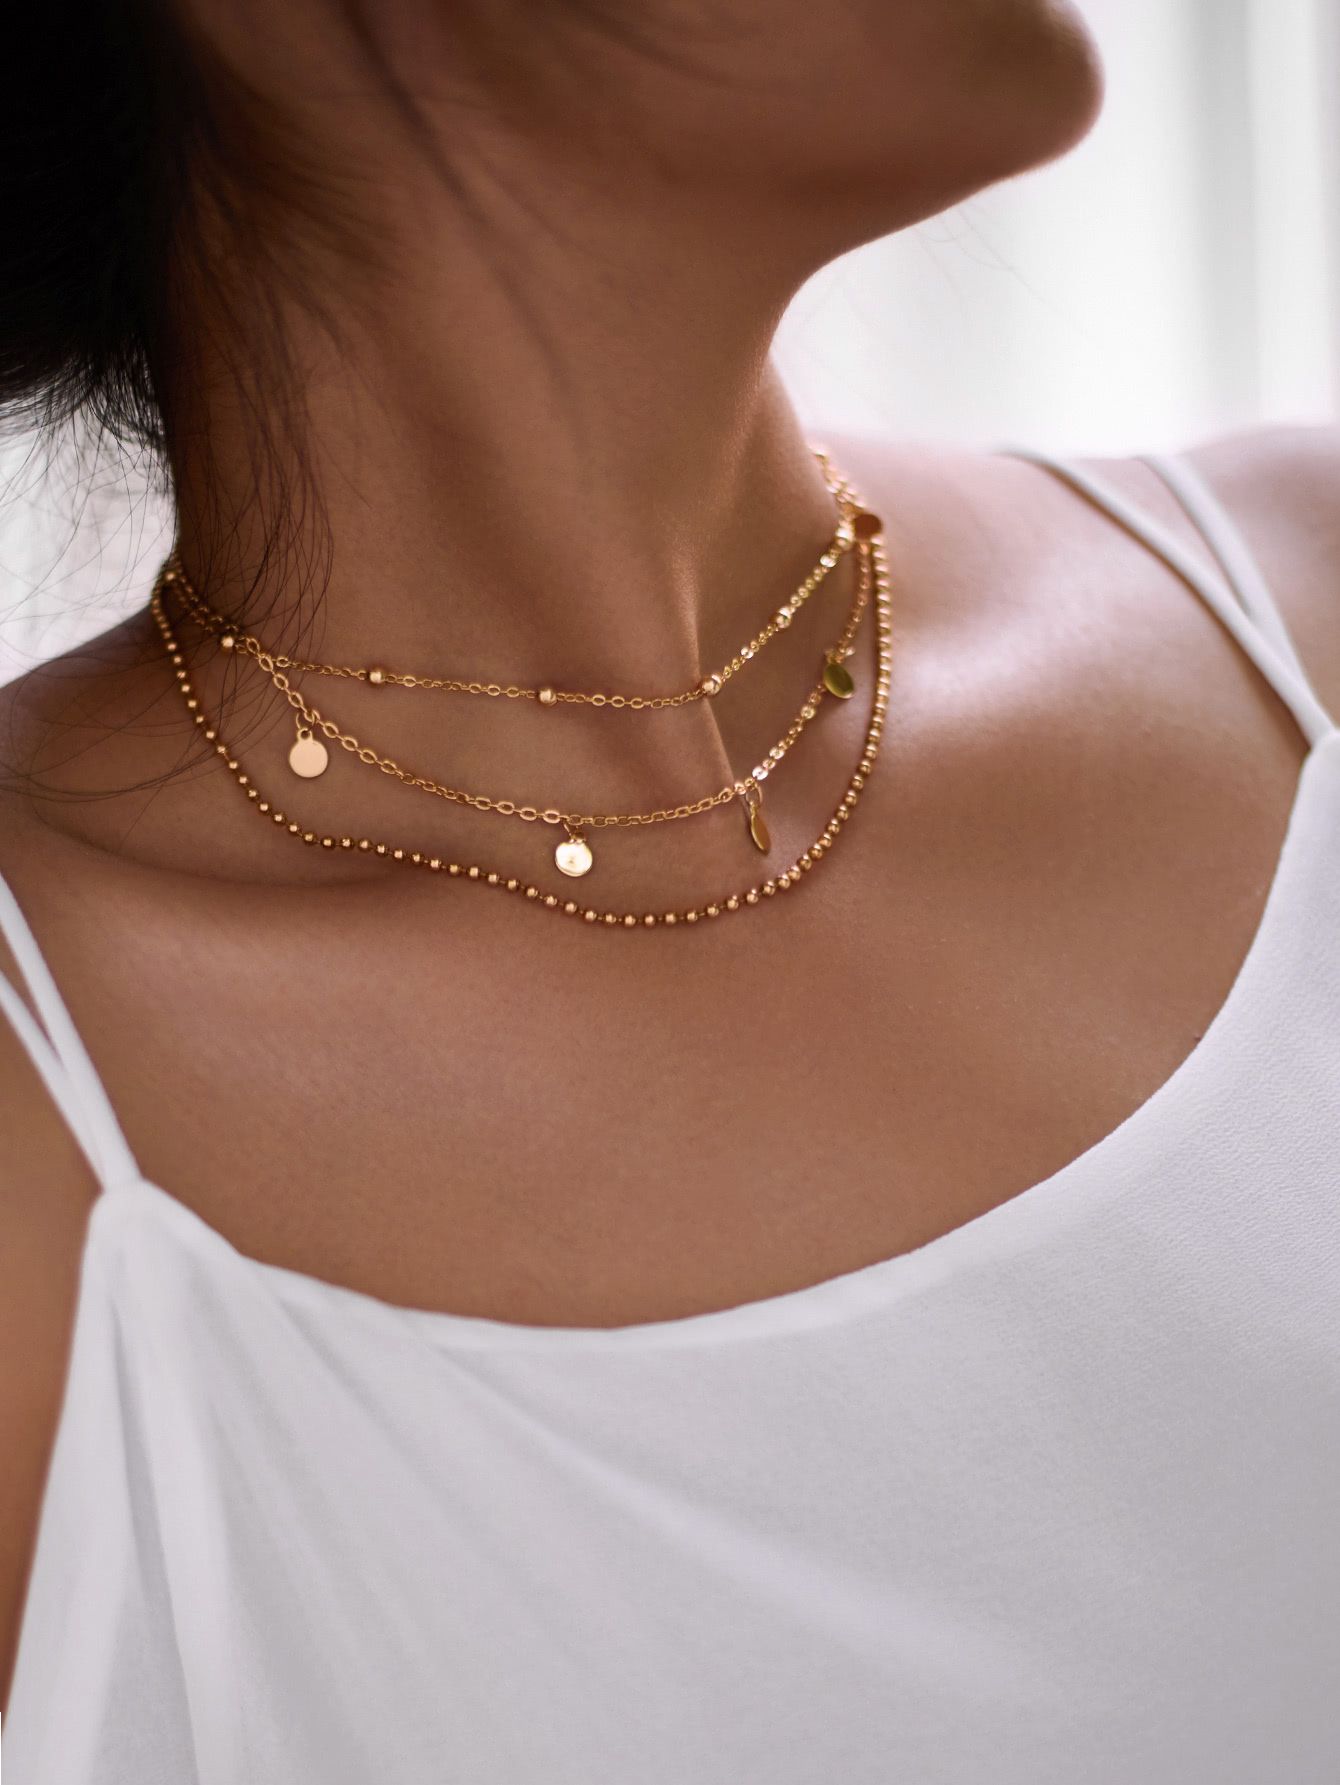 Sequin & Beads Design Layered Chain Necklace | SHEIN